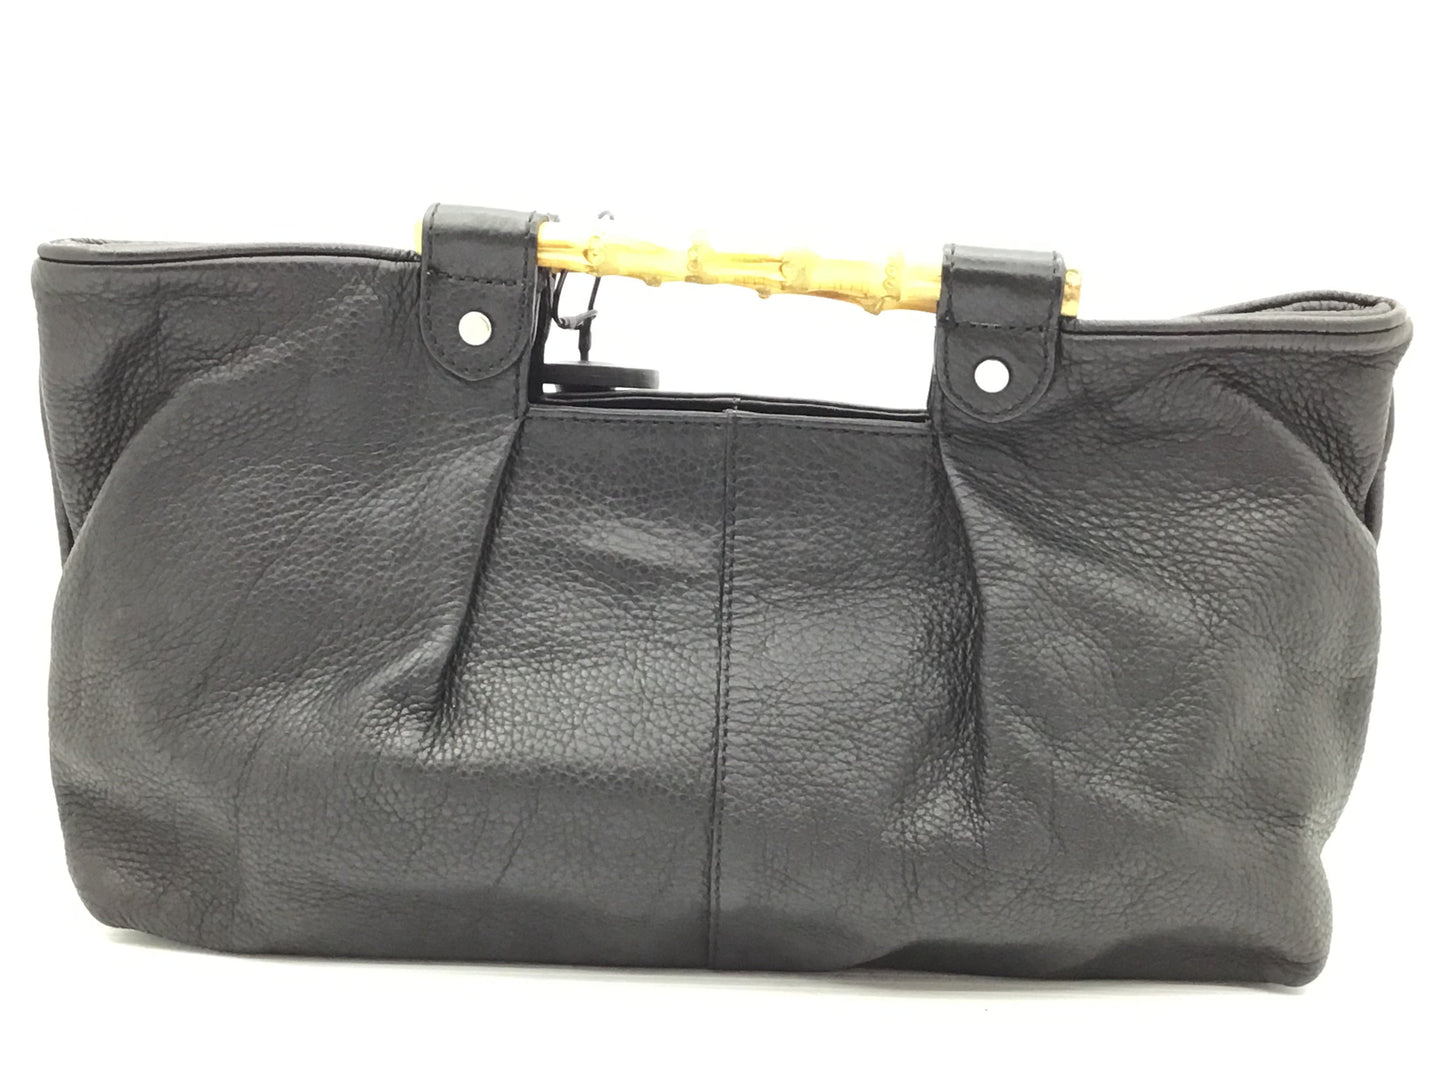 Clutch Leather By Clothes Mentor  Size: Medium